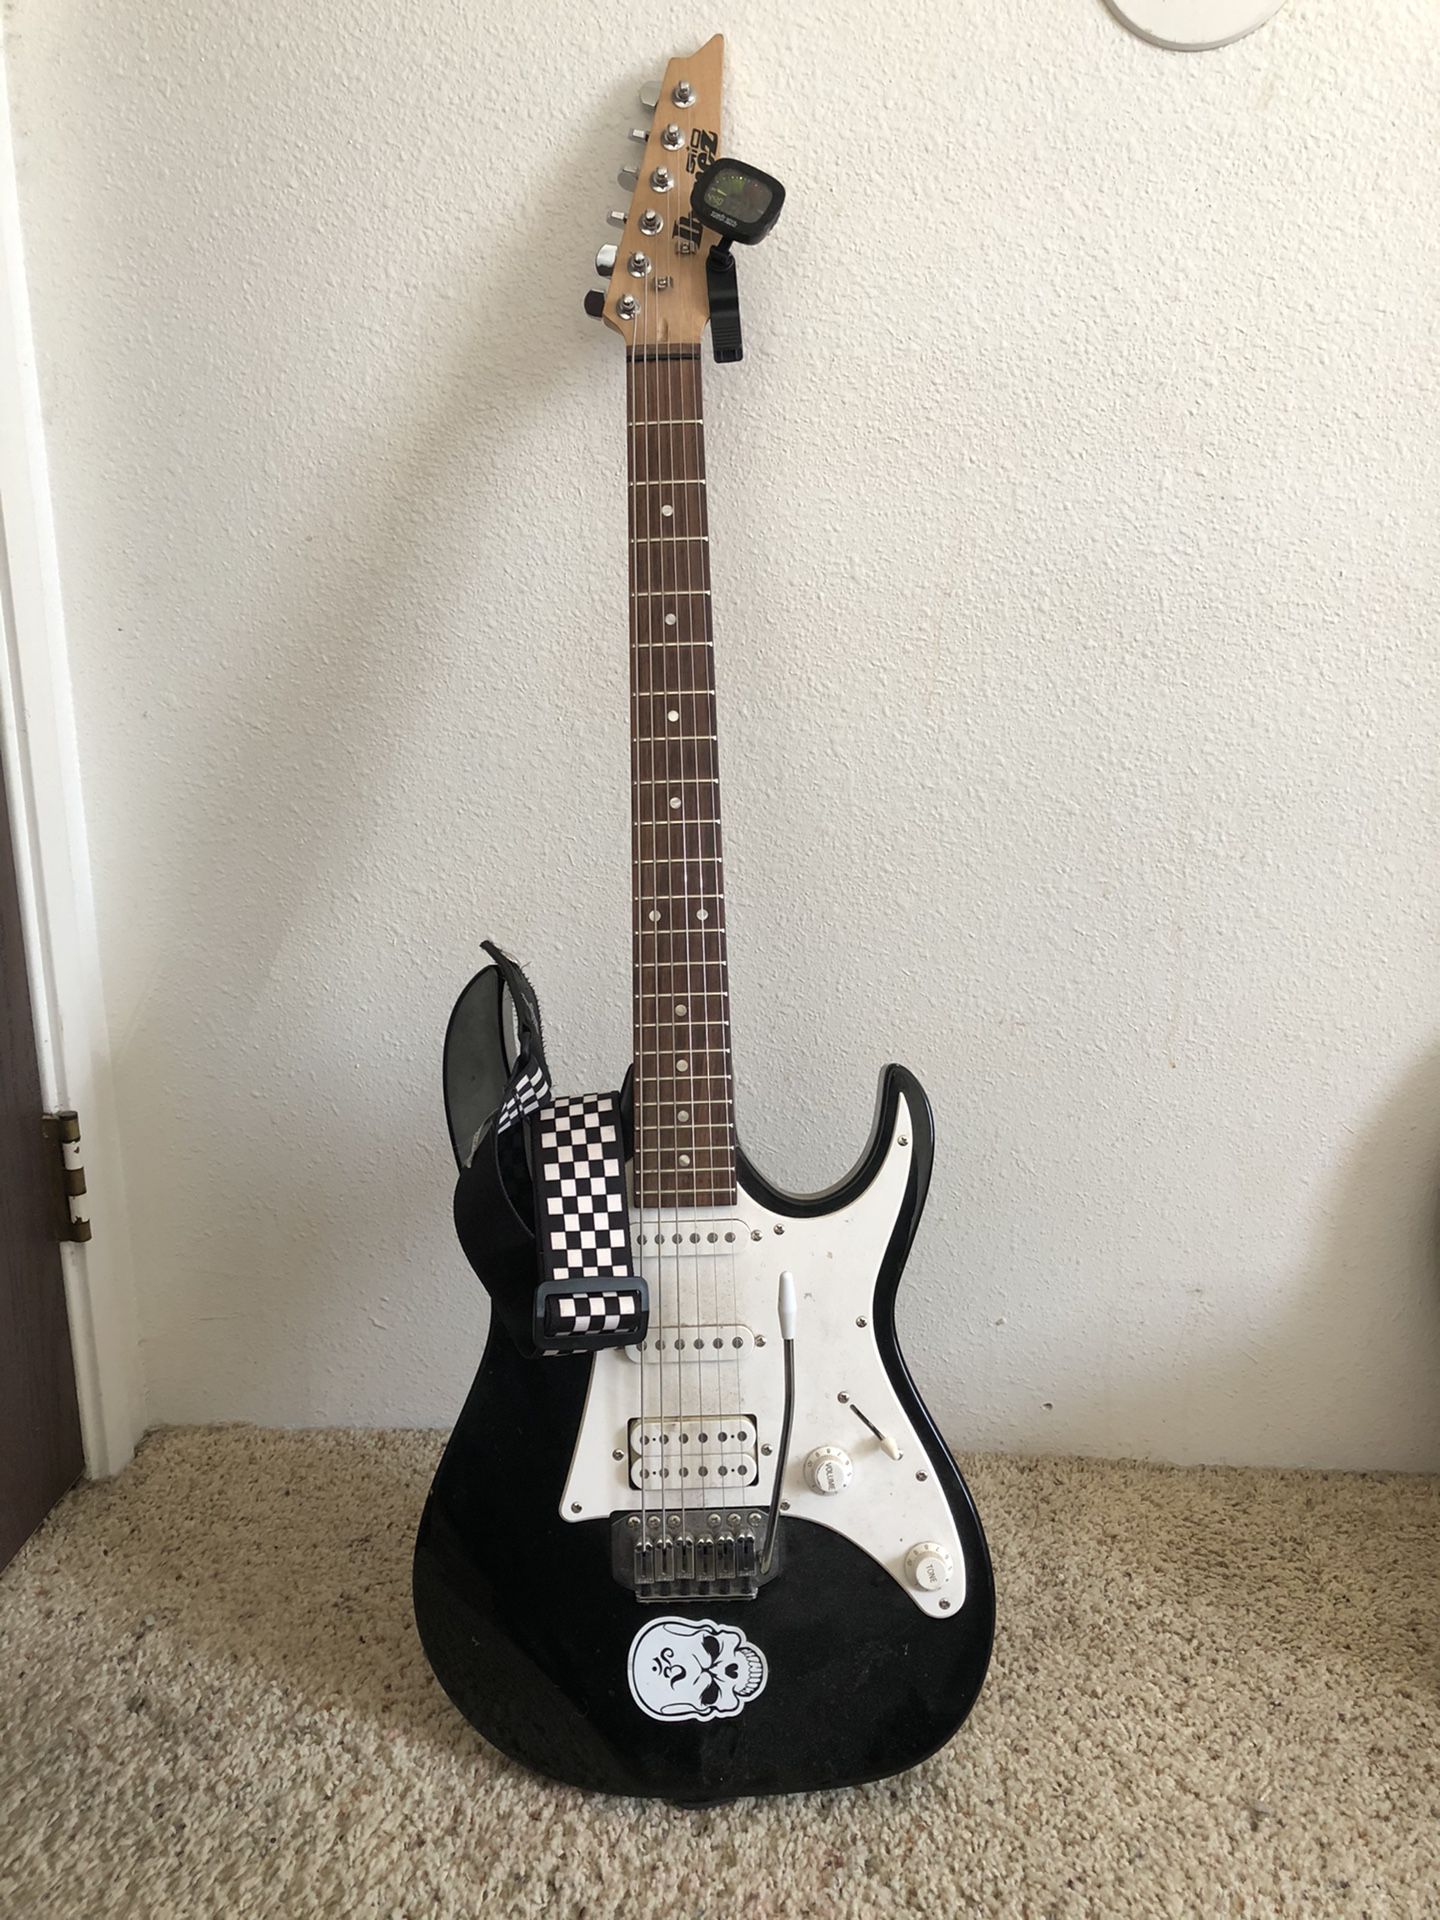 Ibanez Electric Guitar w/ Line 6 Spider III Amp